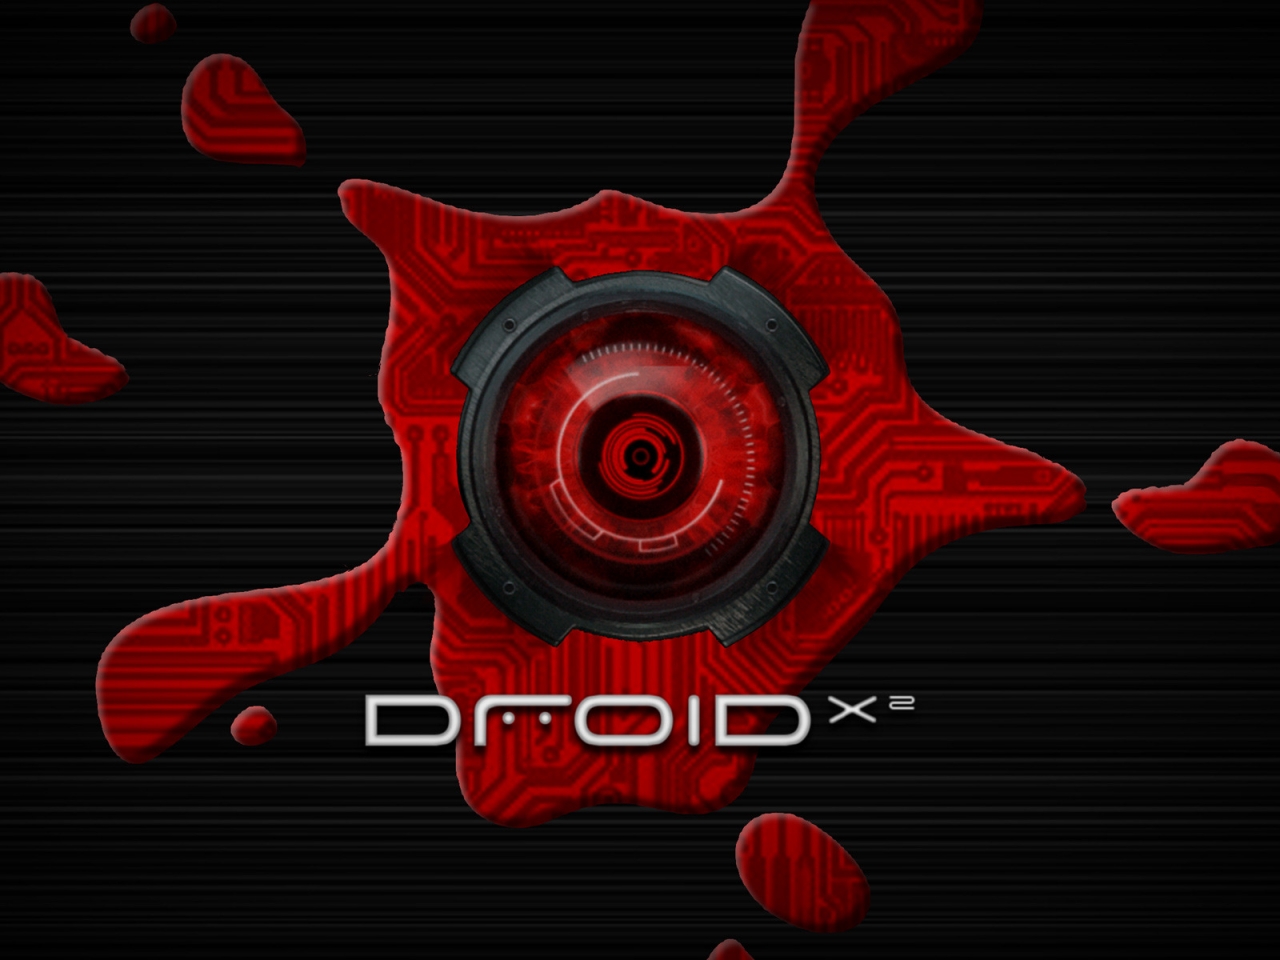 Droid X2 Splat for 1280 x 960 resolution